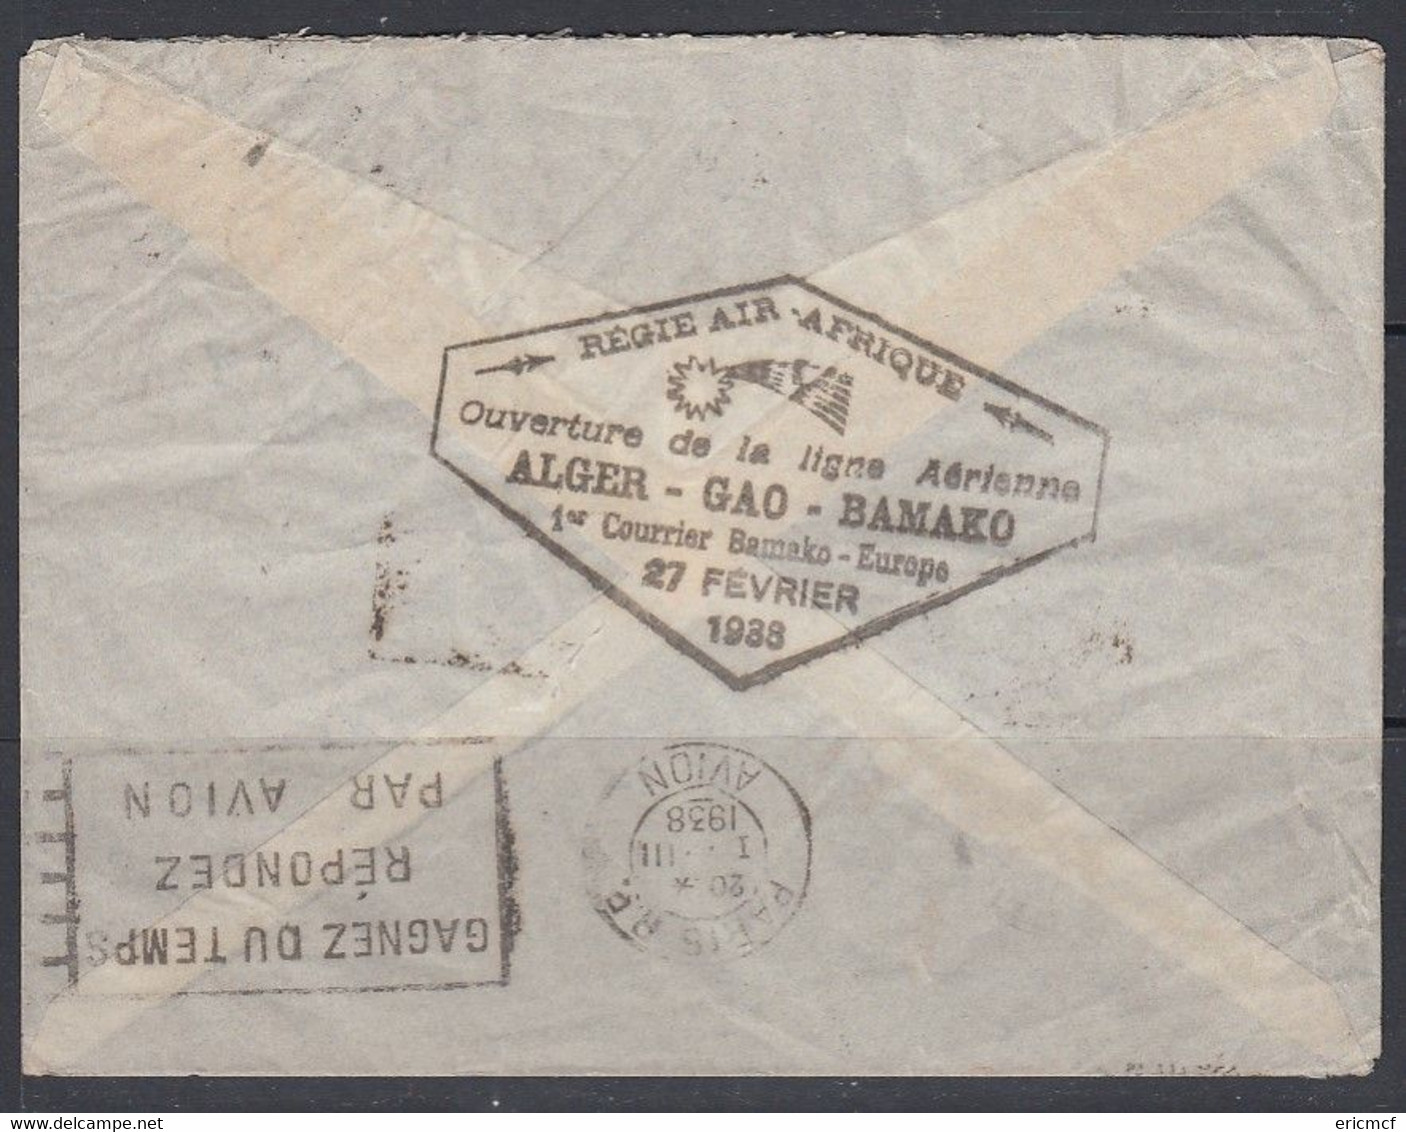 French Sudan 1938 First Flight Bamako Gao Algeria France FF Cover - Lettres & Documents